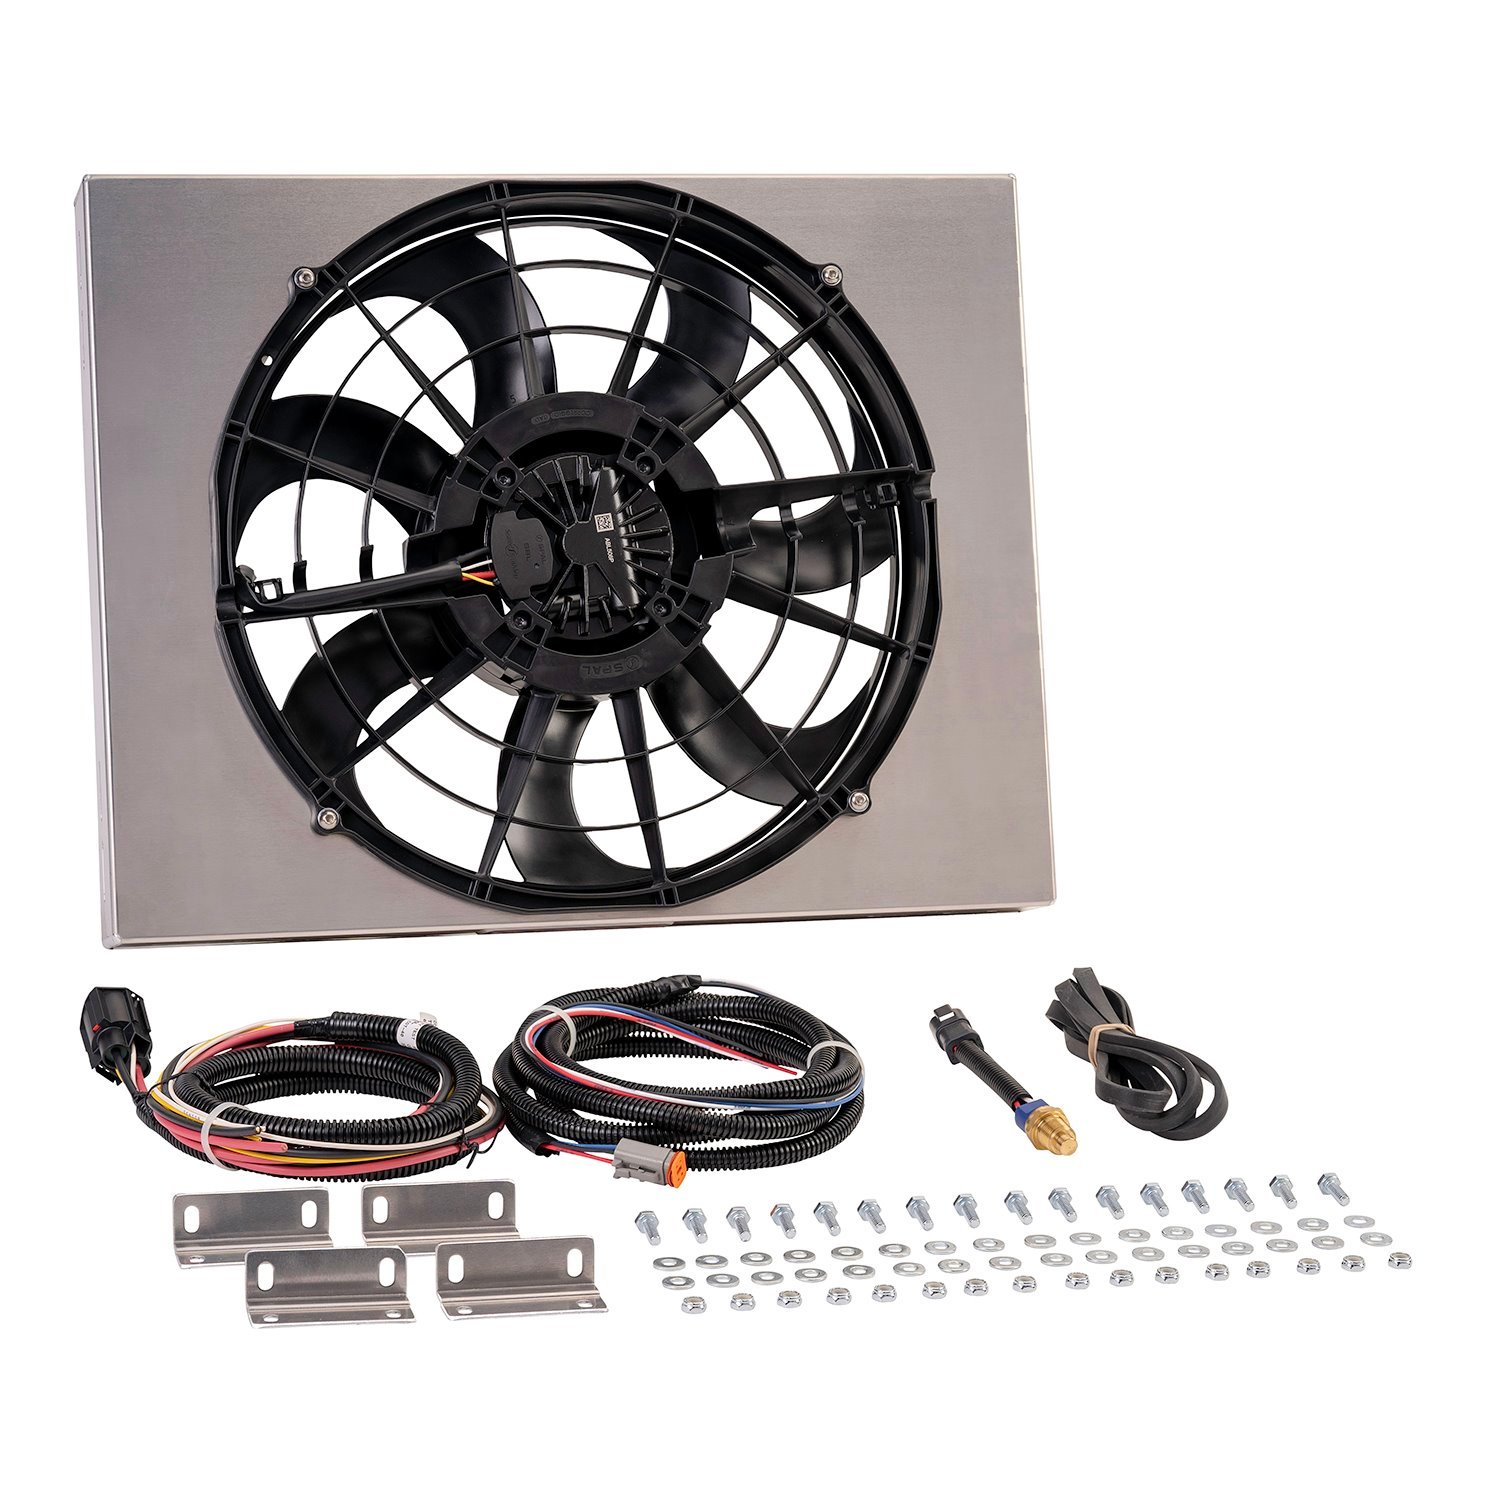 67923-215 Brushless Single Powerpack 17 in. Radiator Fan Assembly with Integrated 215 Degree PWM Controller